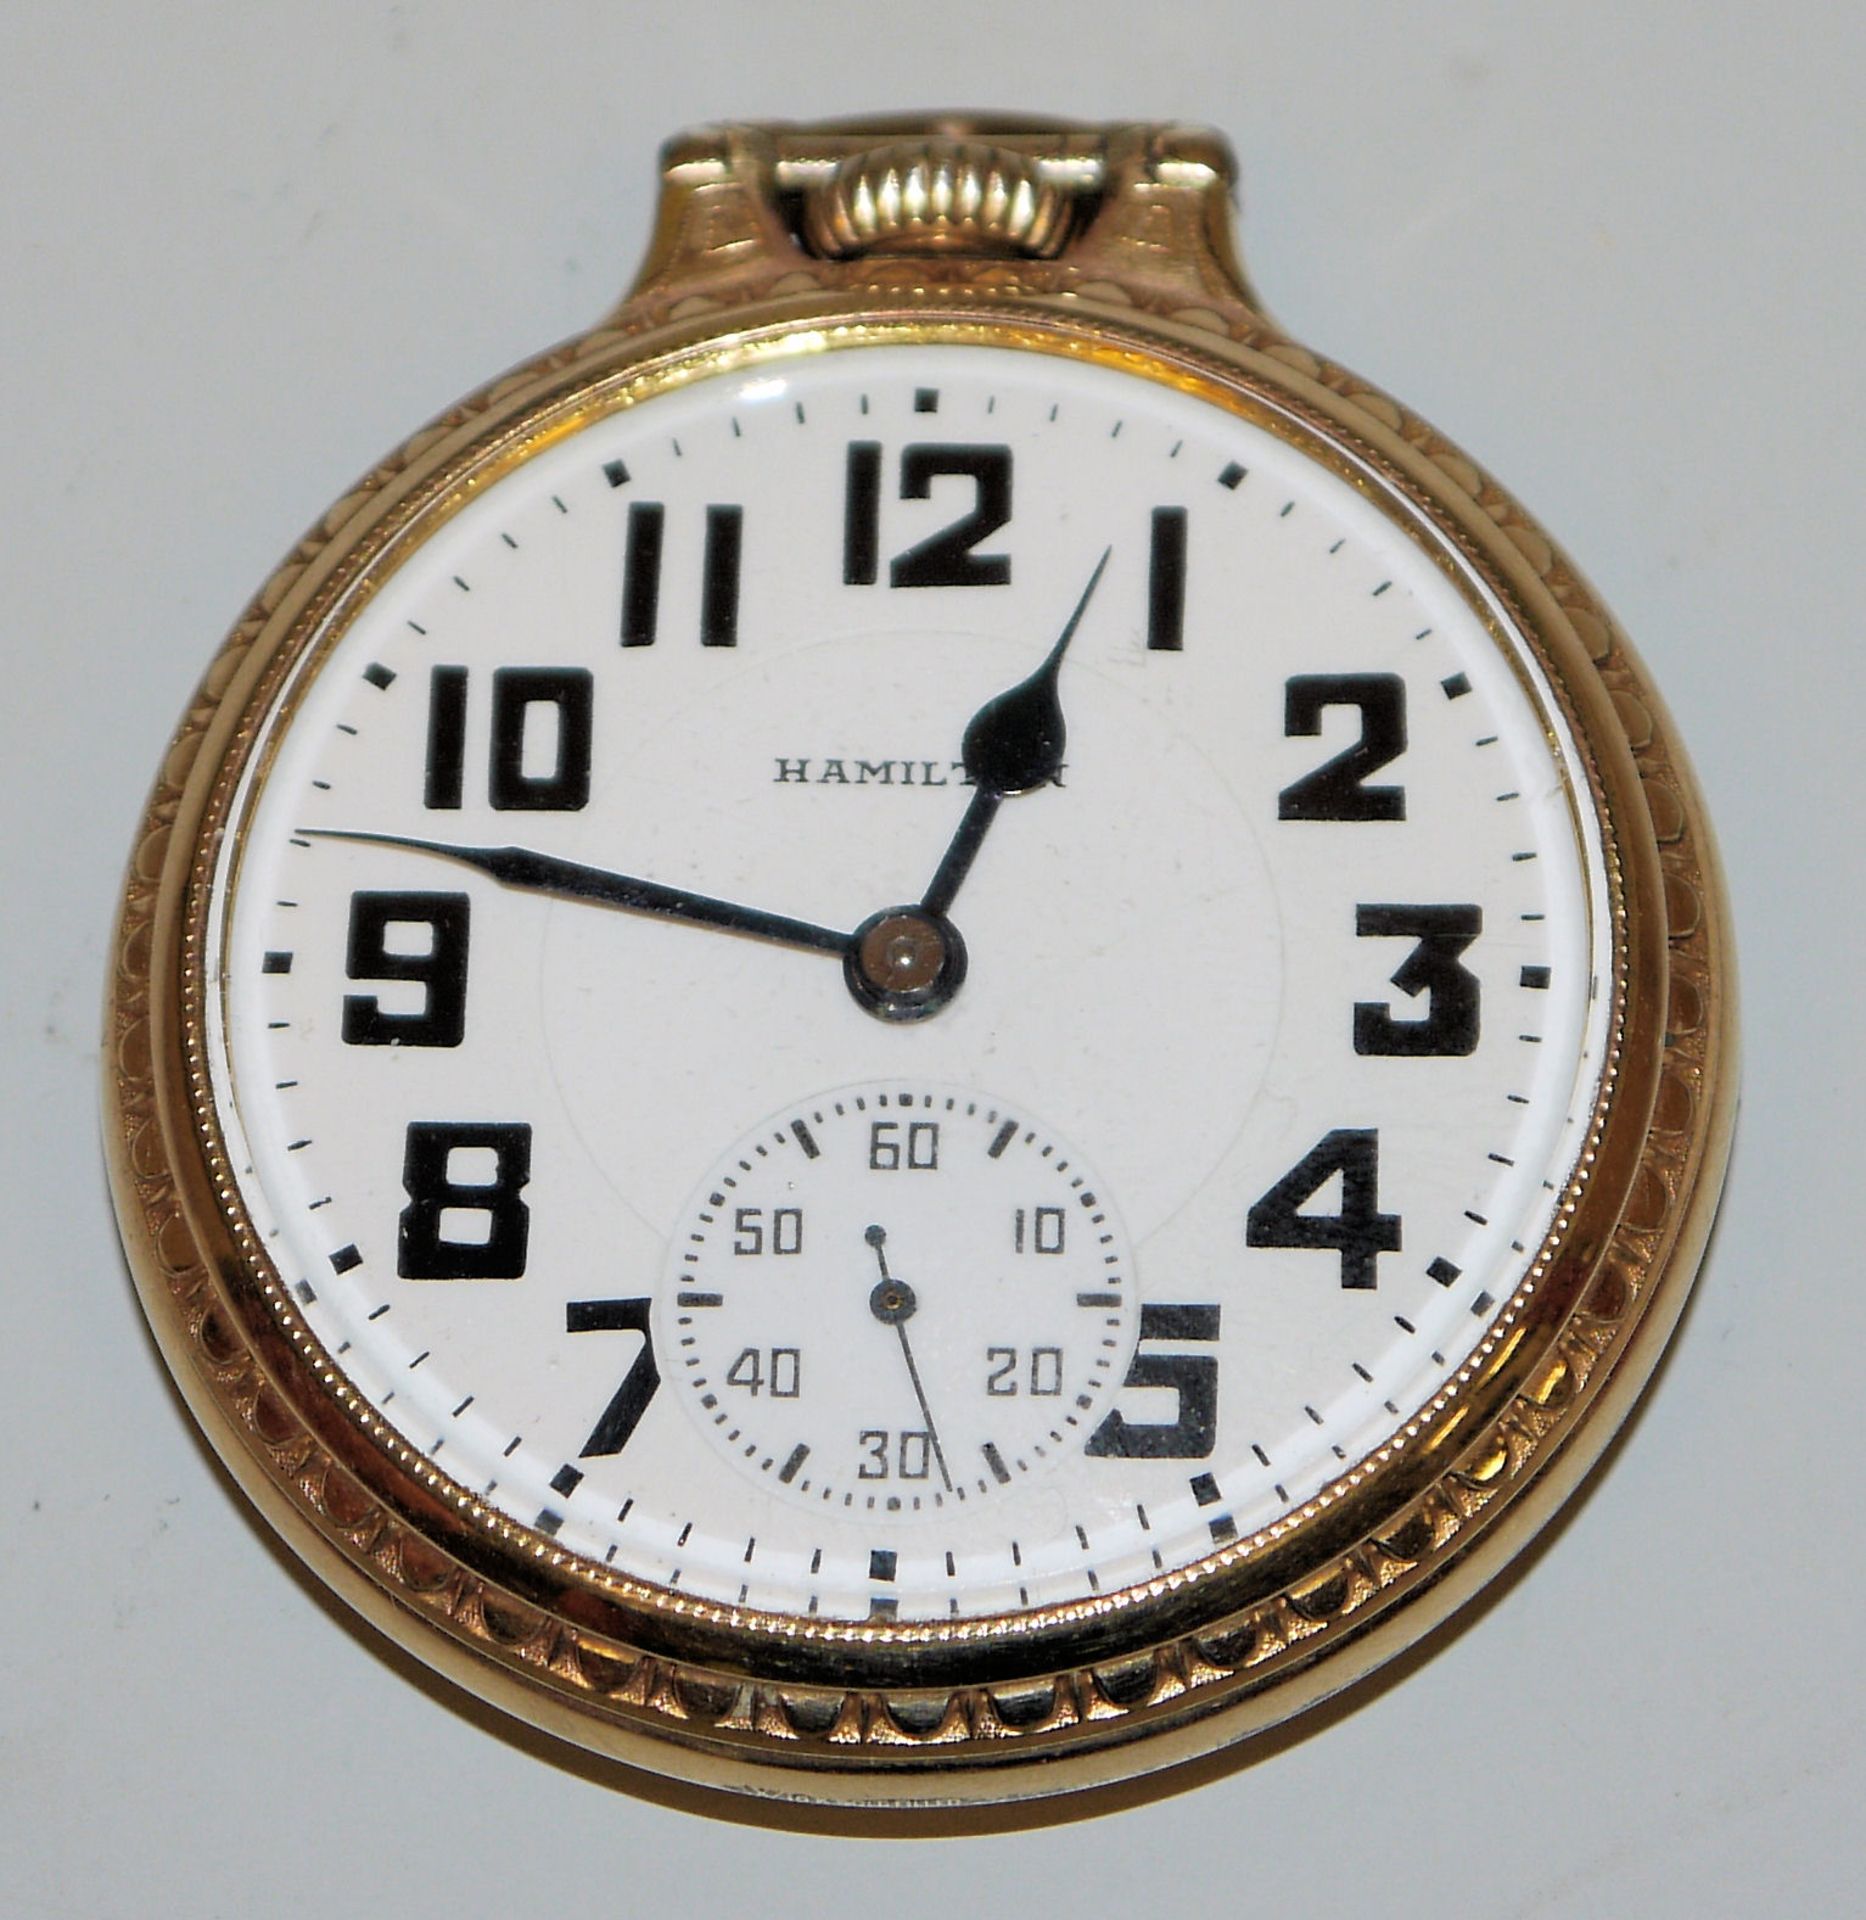 Pocket watch with concealed hands, Hamilton Watch Co., USA 1918